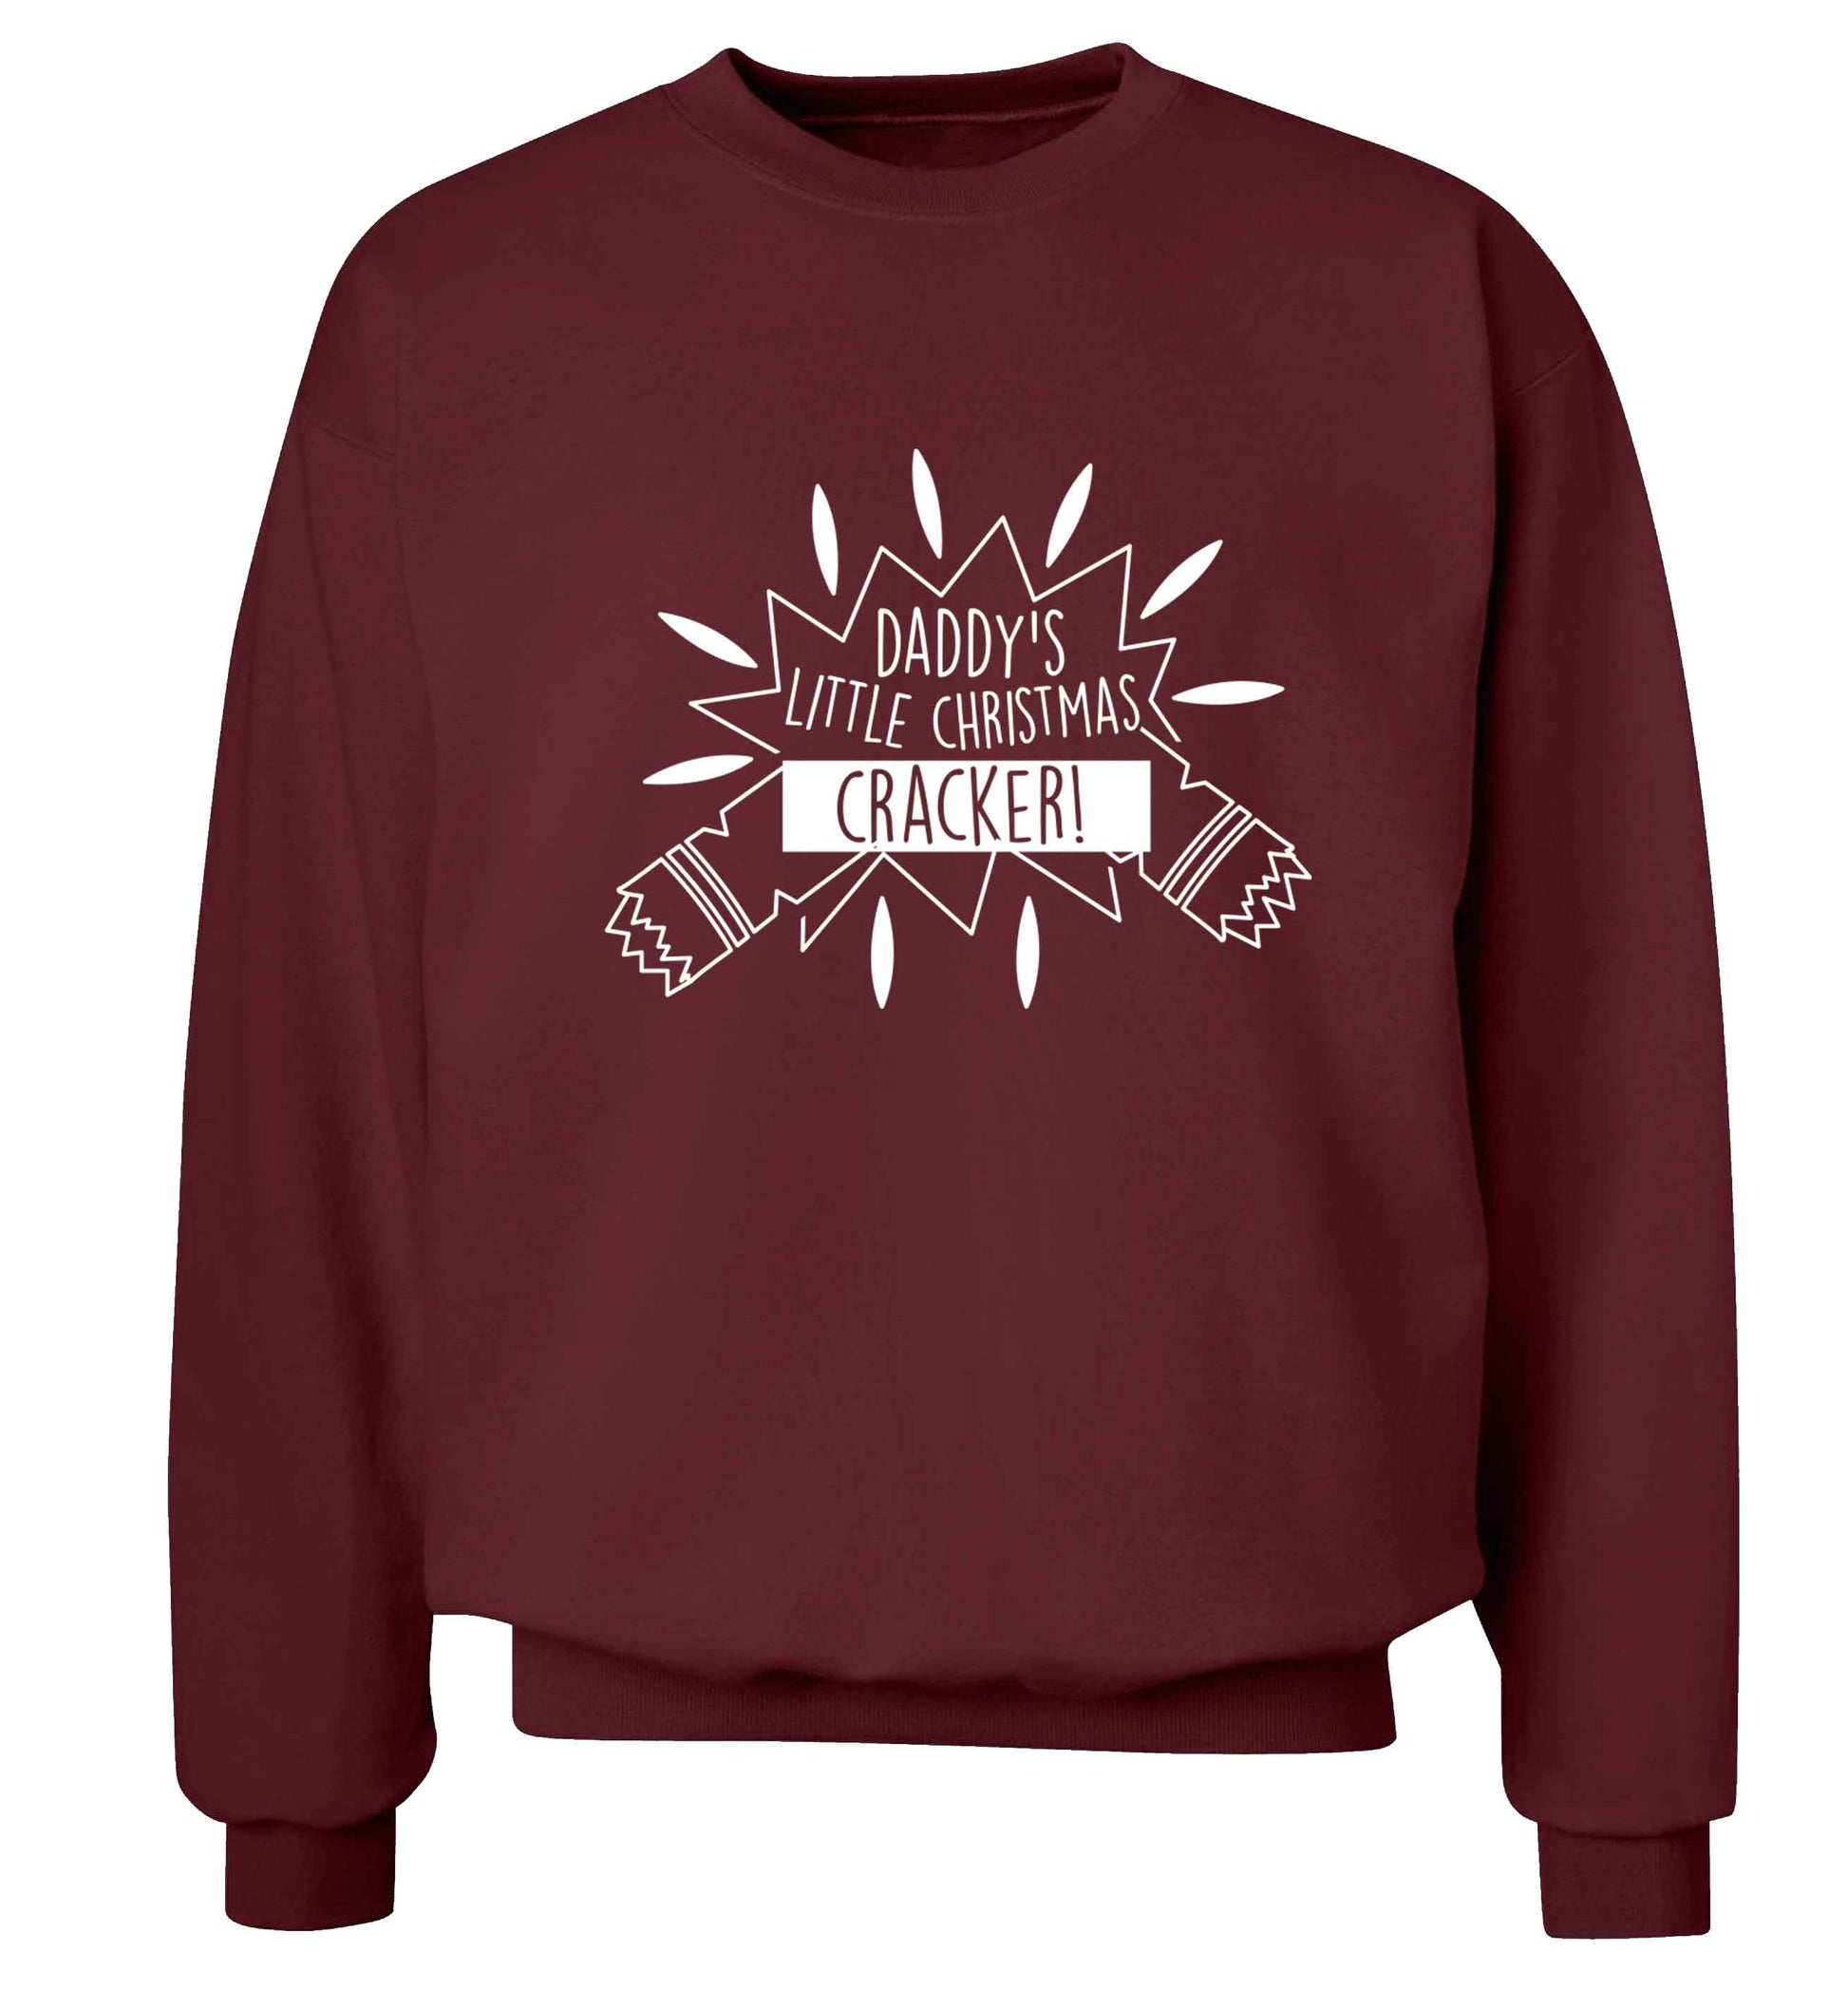 Daddy's little Christmas cracker Adult's unisex maroon Sweater 2XL